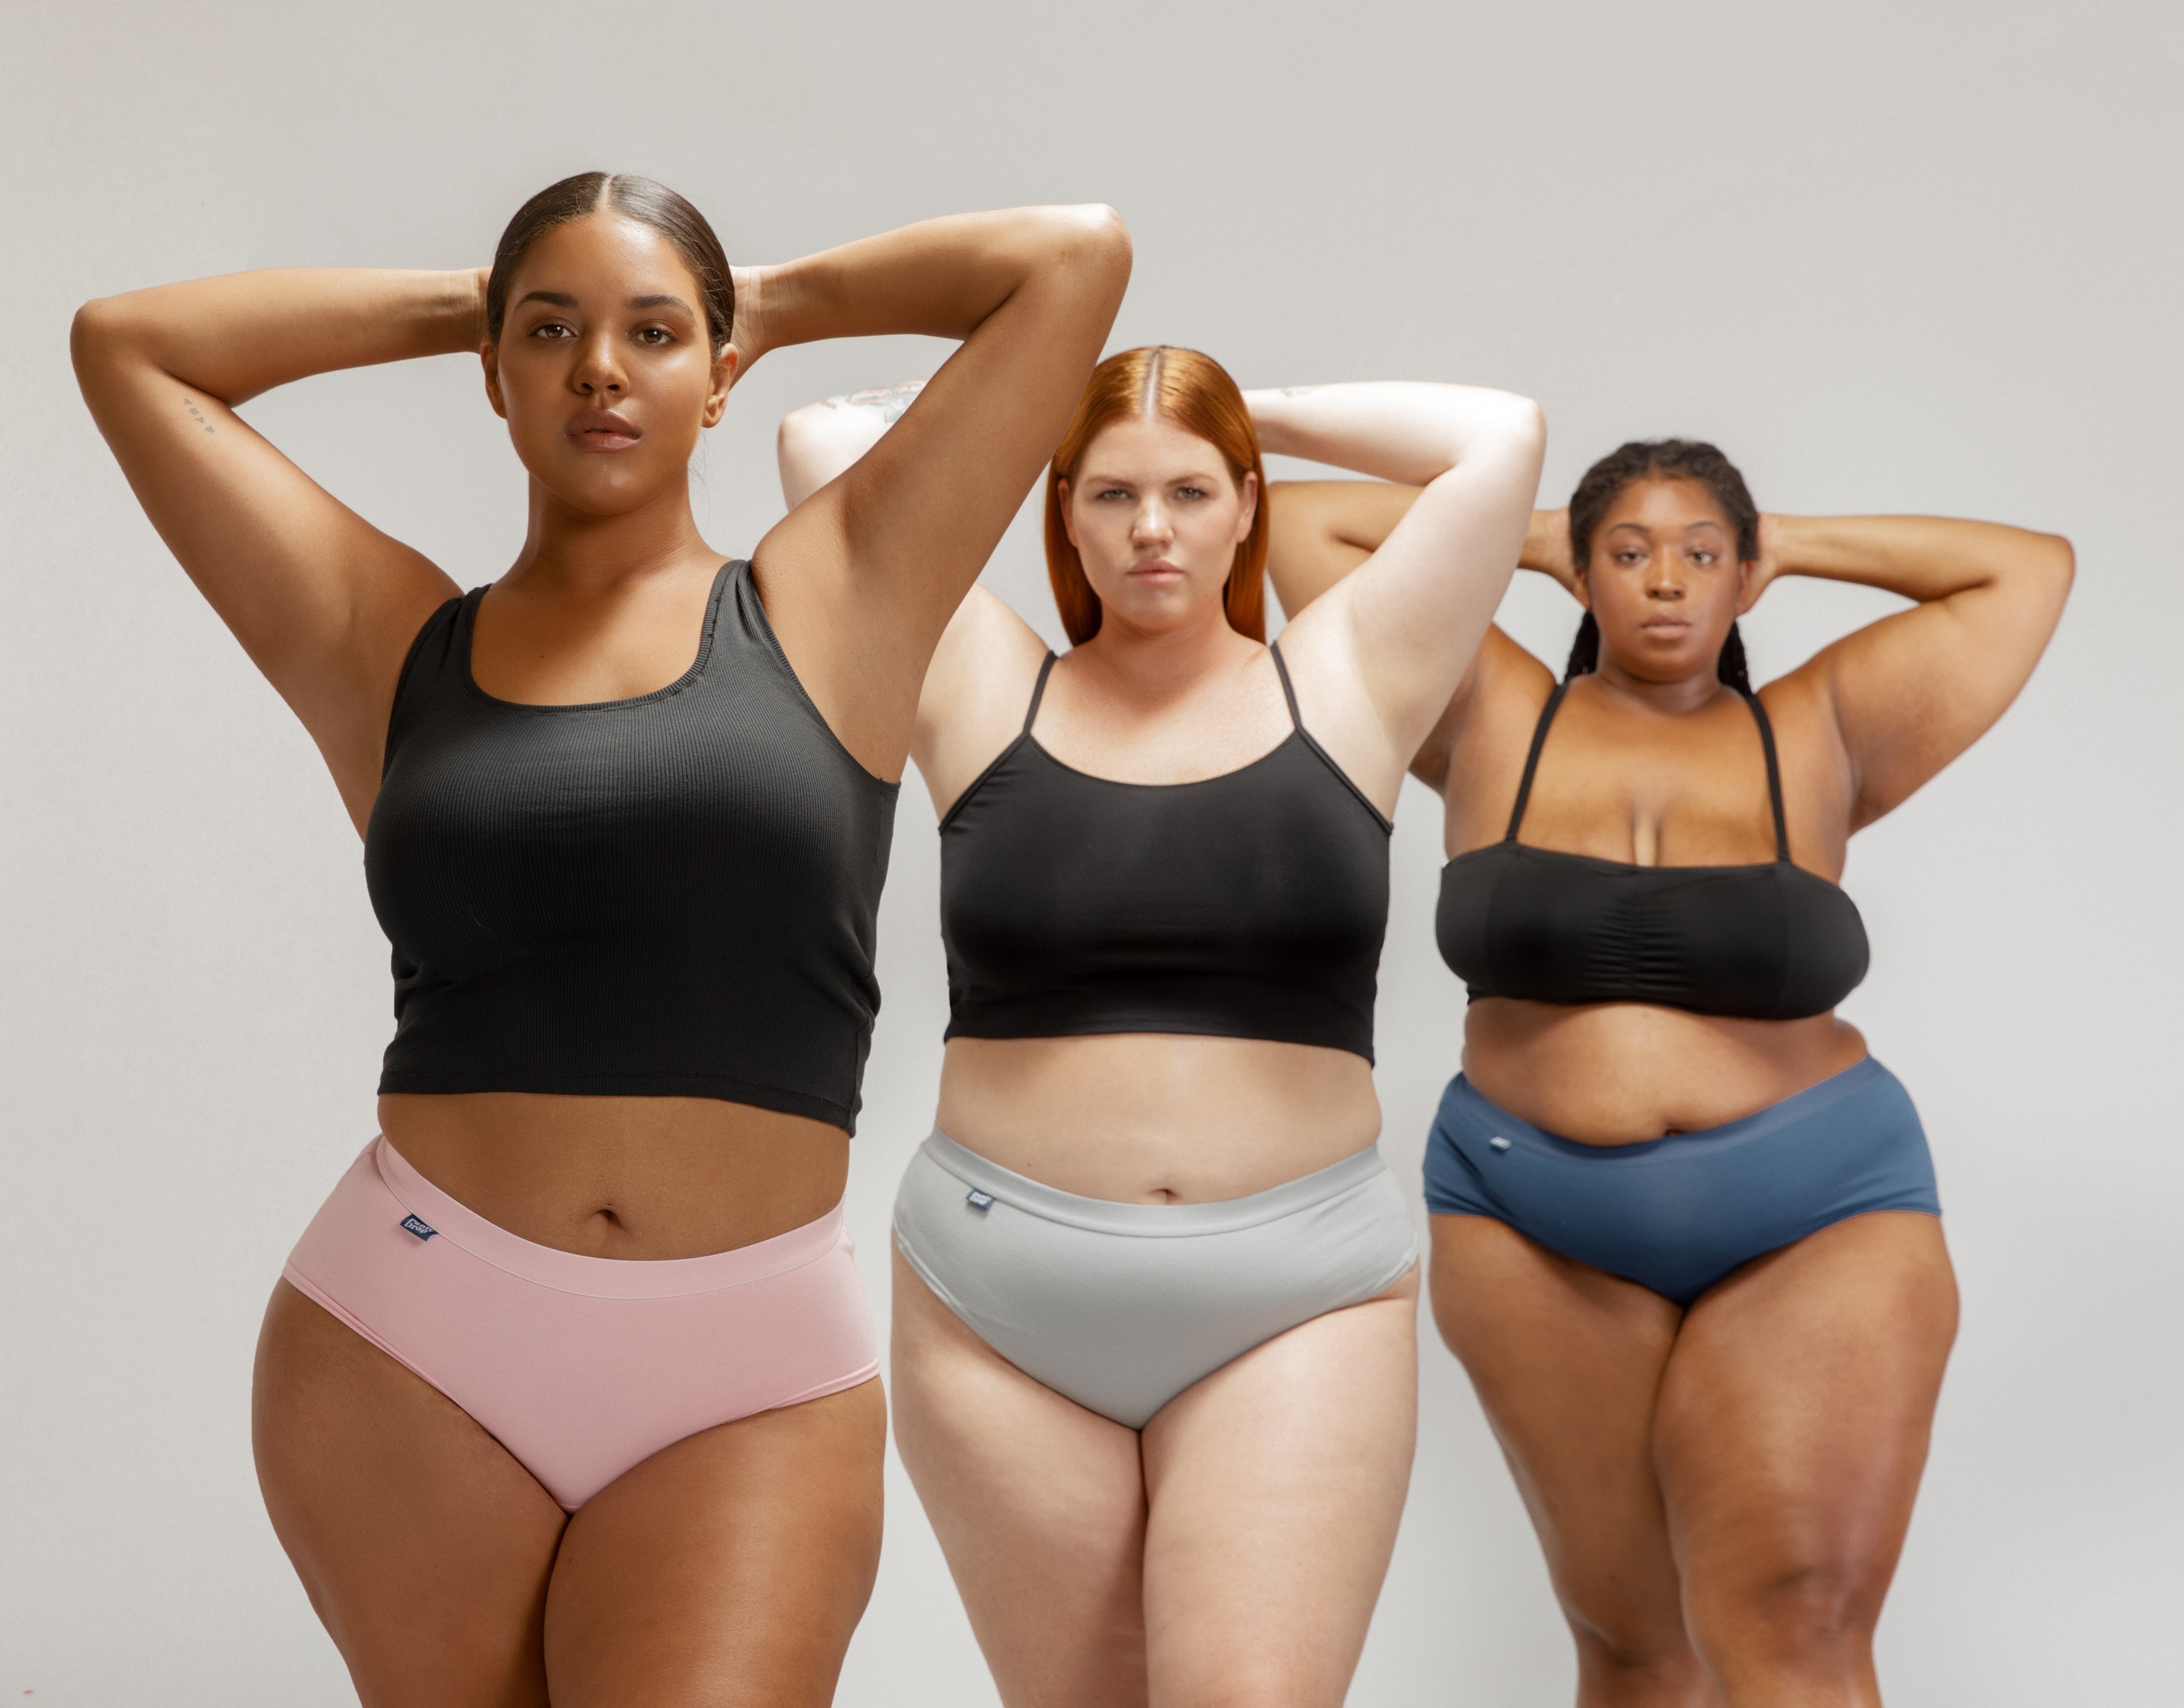 Woolworths underwear sales are up: Why women are buying undies